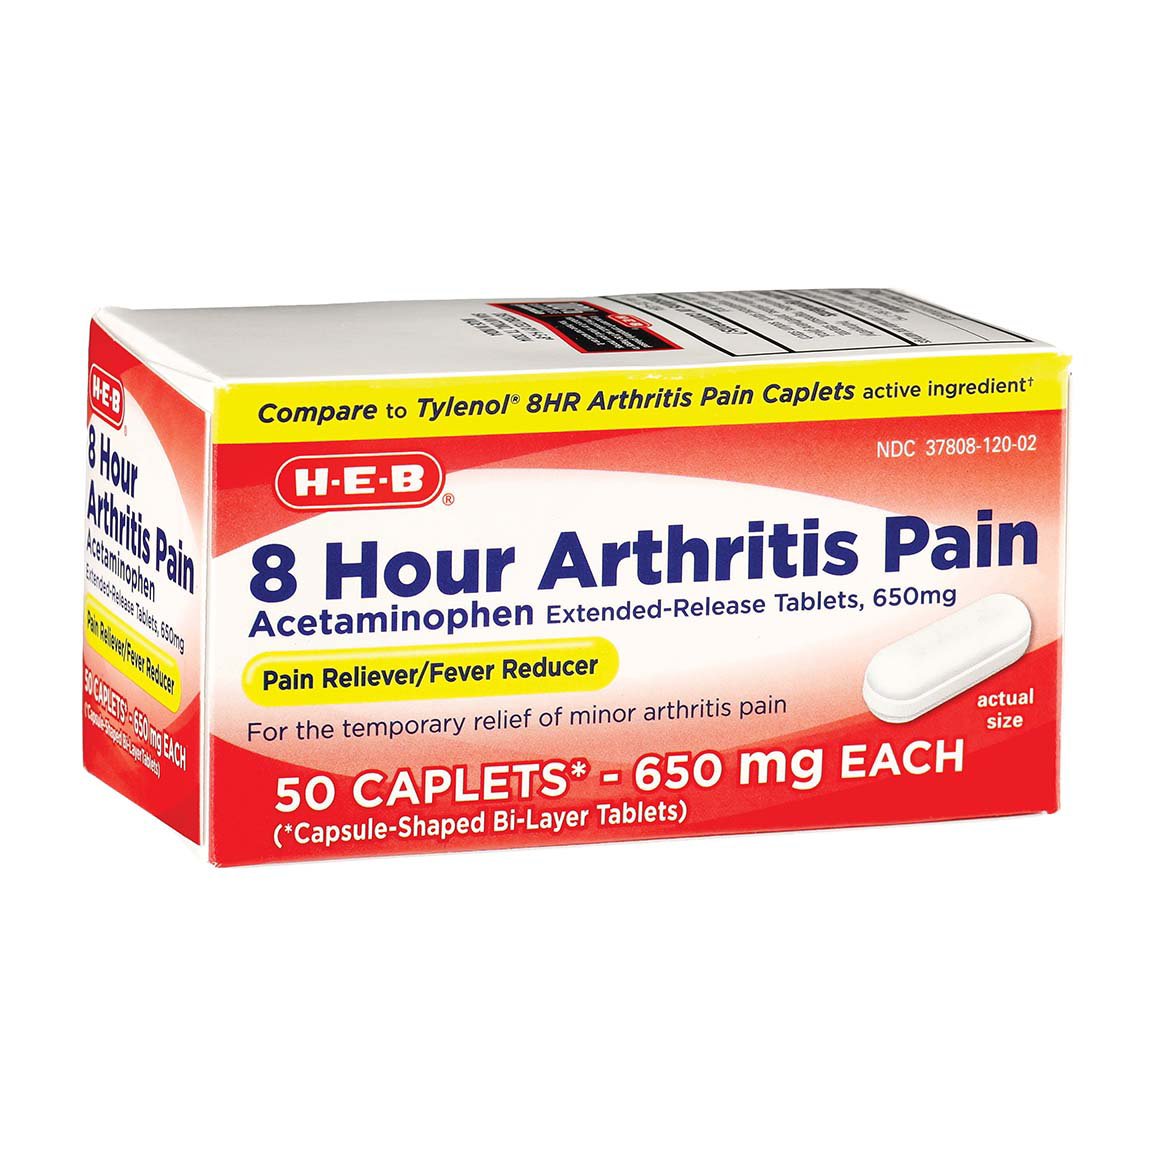 What is the Best Drug for Arthritis Pain?